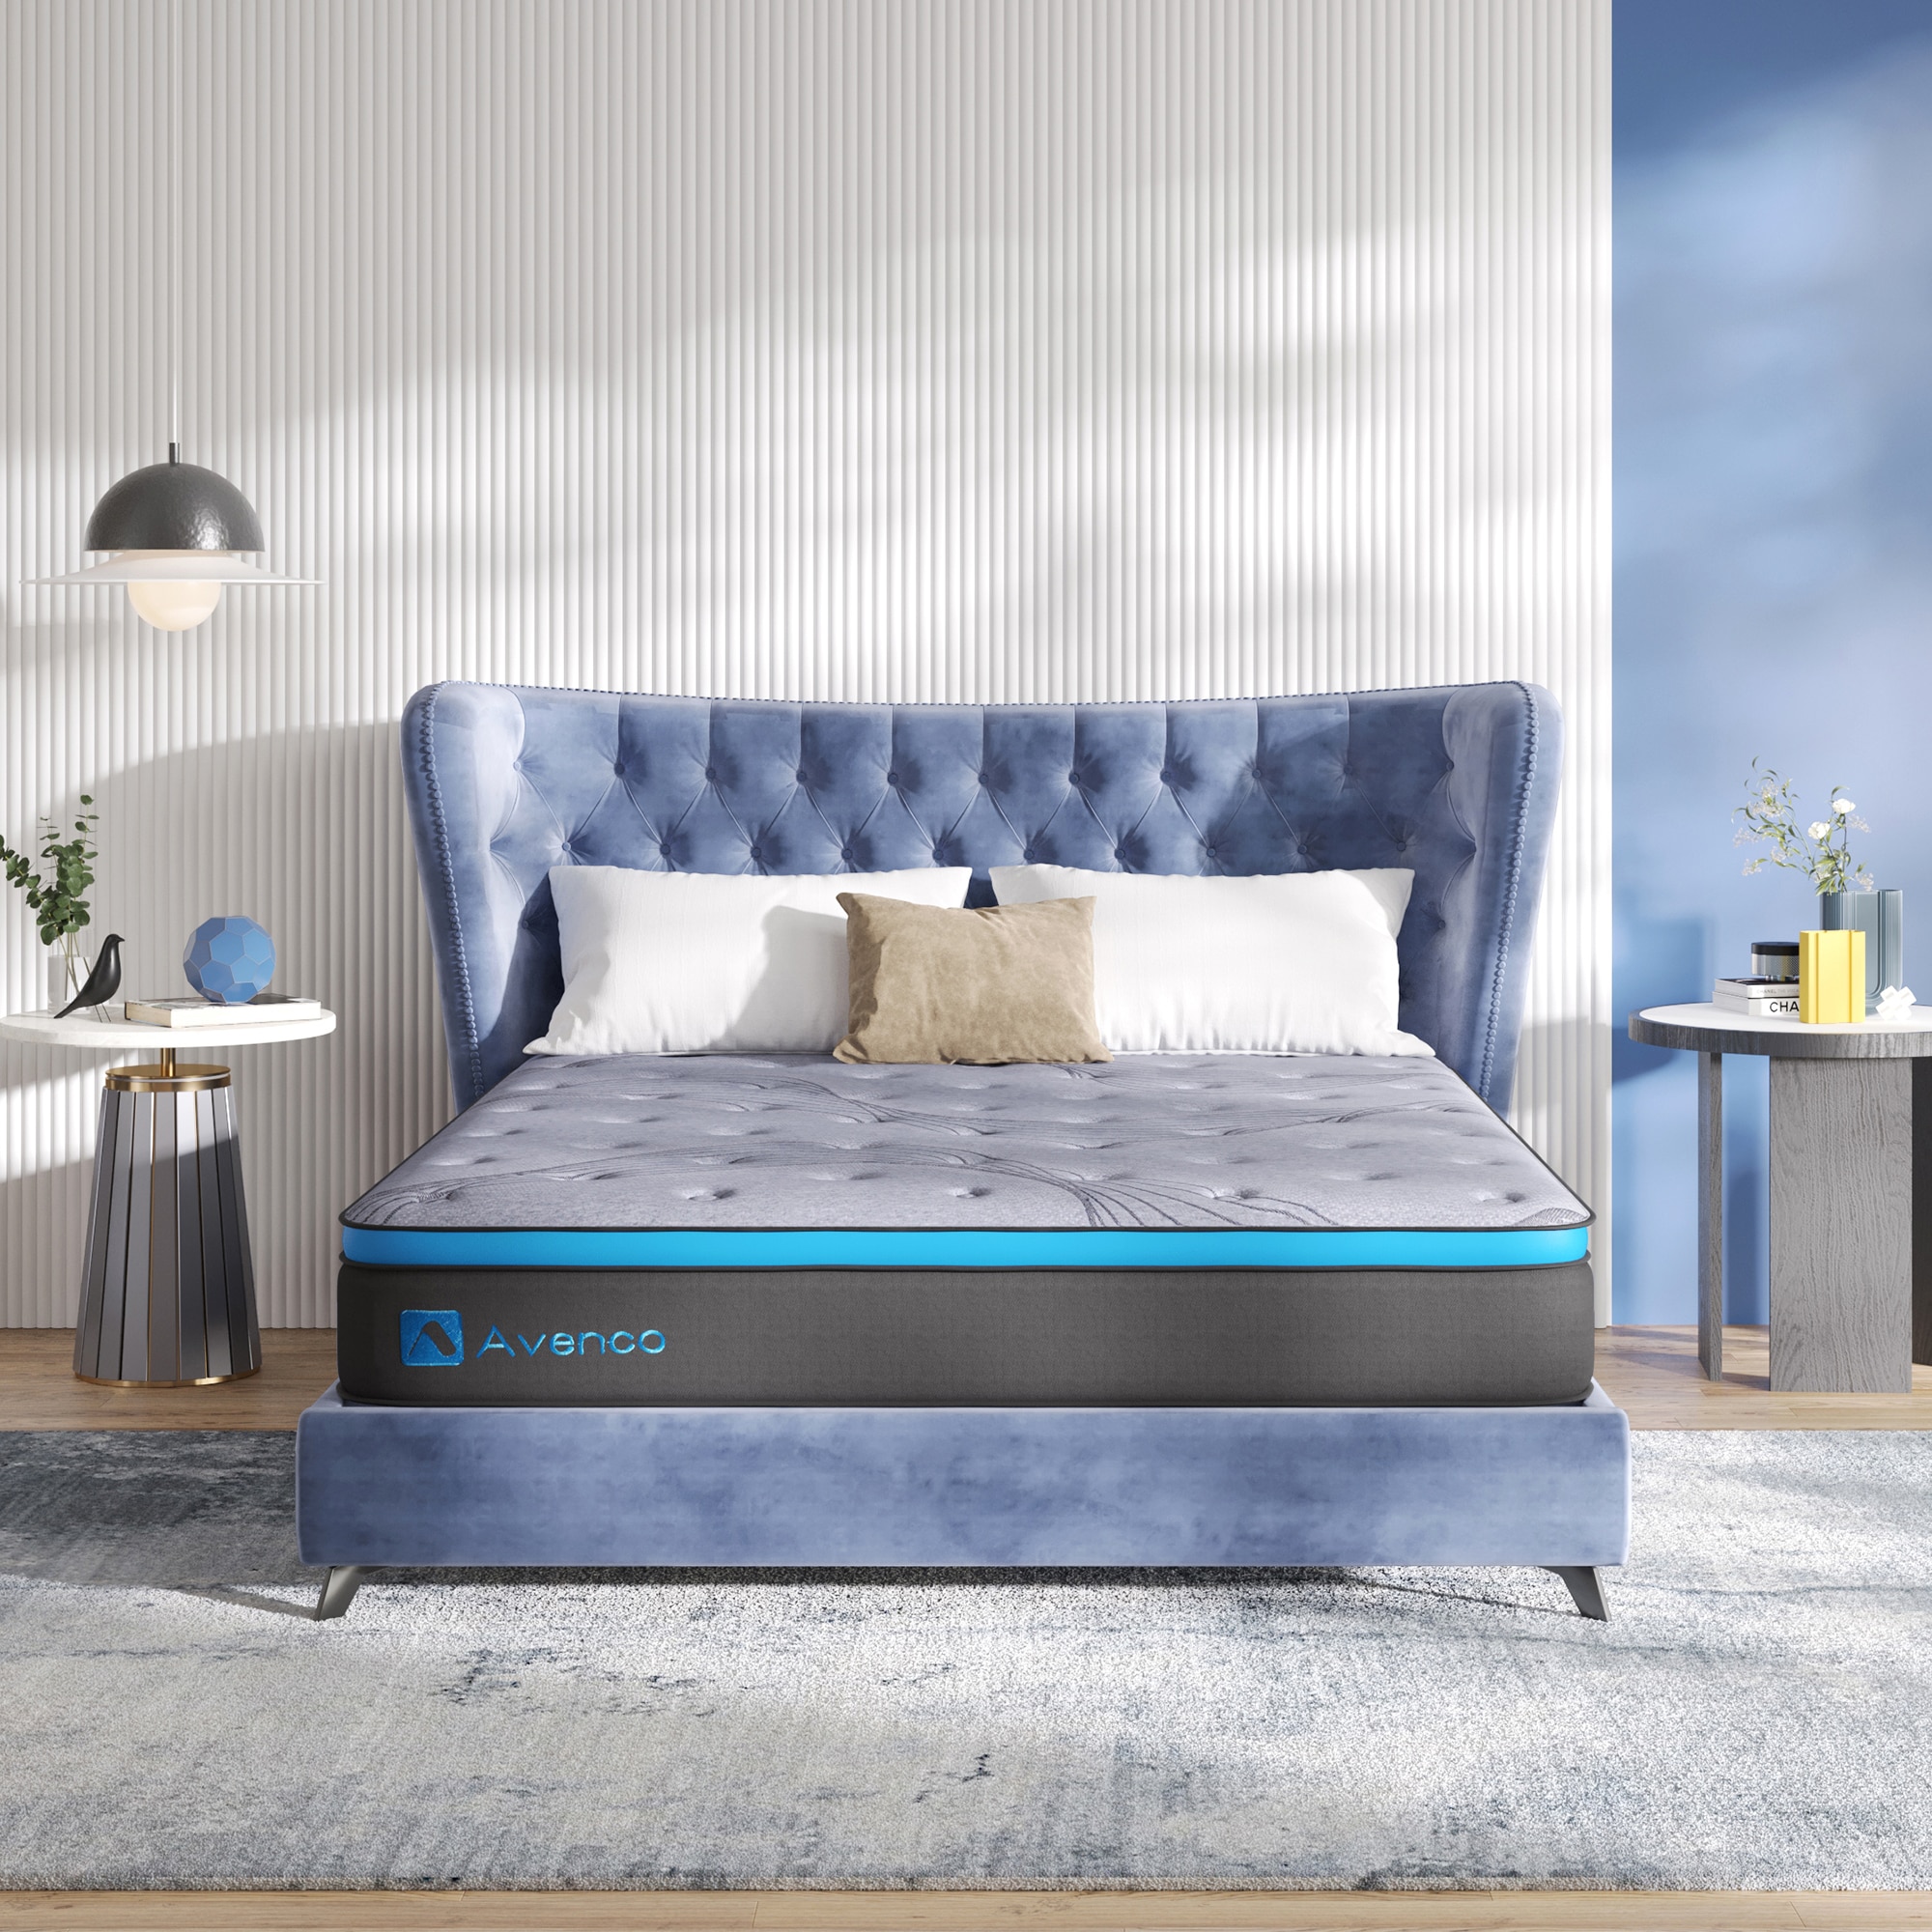 How to Clean a Mattress in 6 Easy Steps